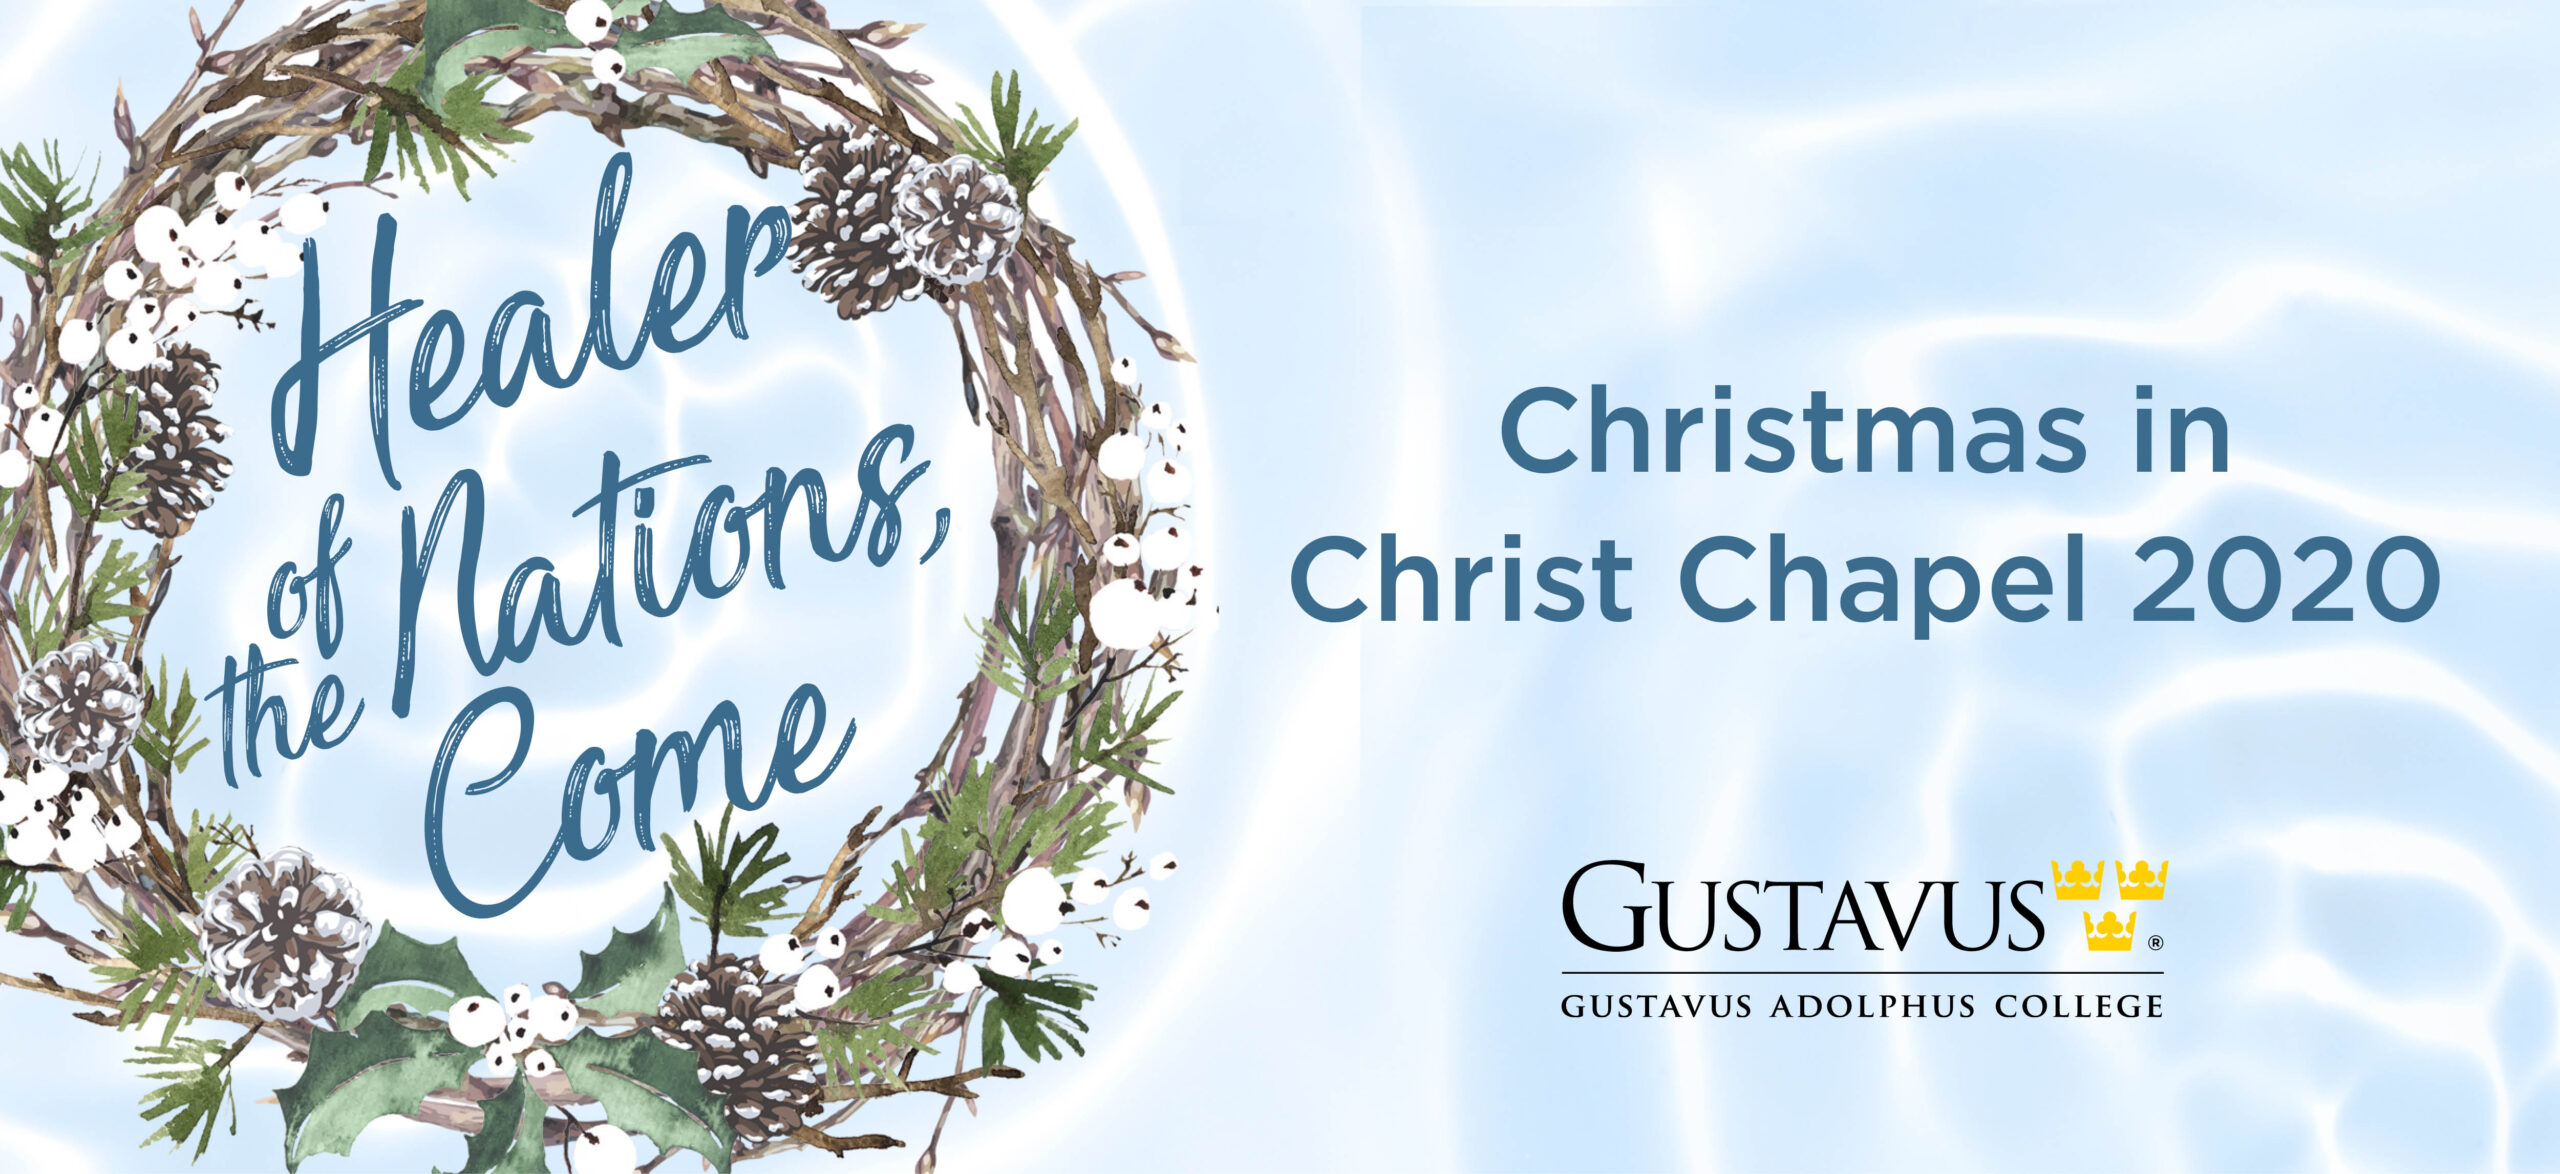 Christmas (in Christ Chapel) Comes Early On December 19, Gusties and